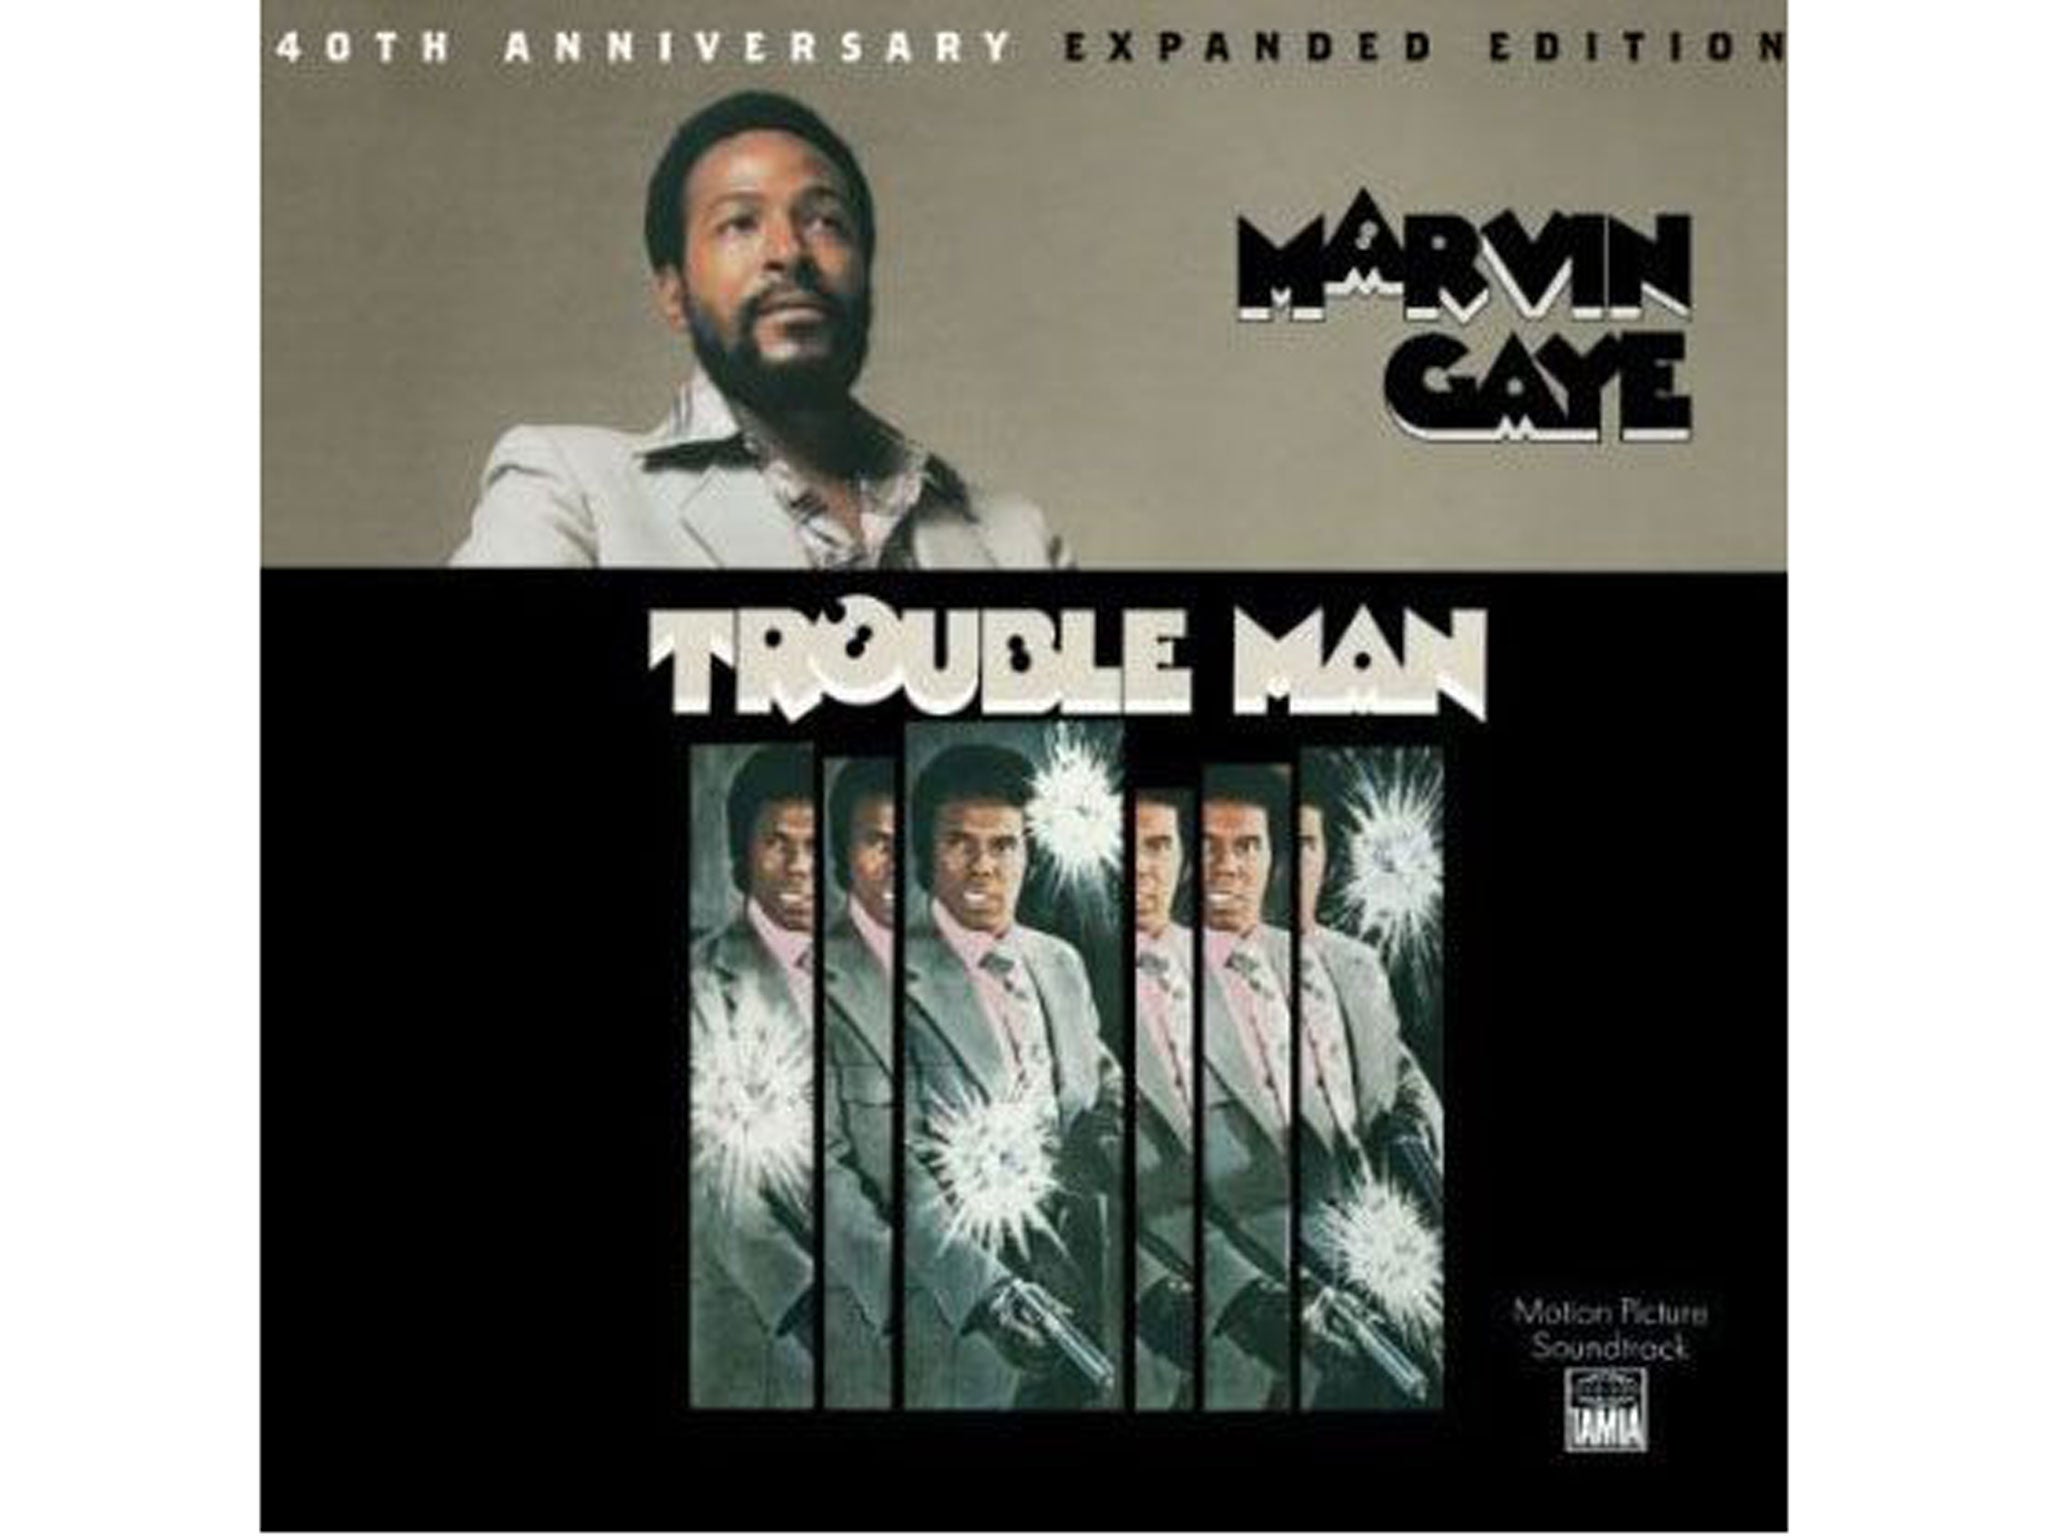 Marvin Gaye, Trouble Man: 40th Anniversary Expanded Edition (Motown)